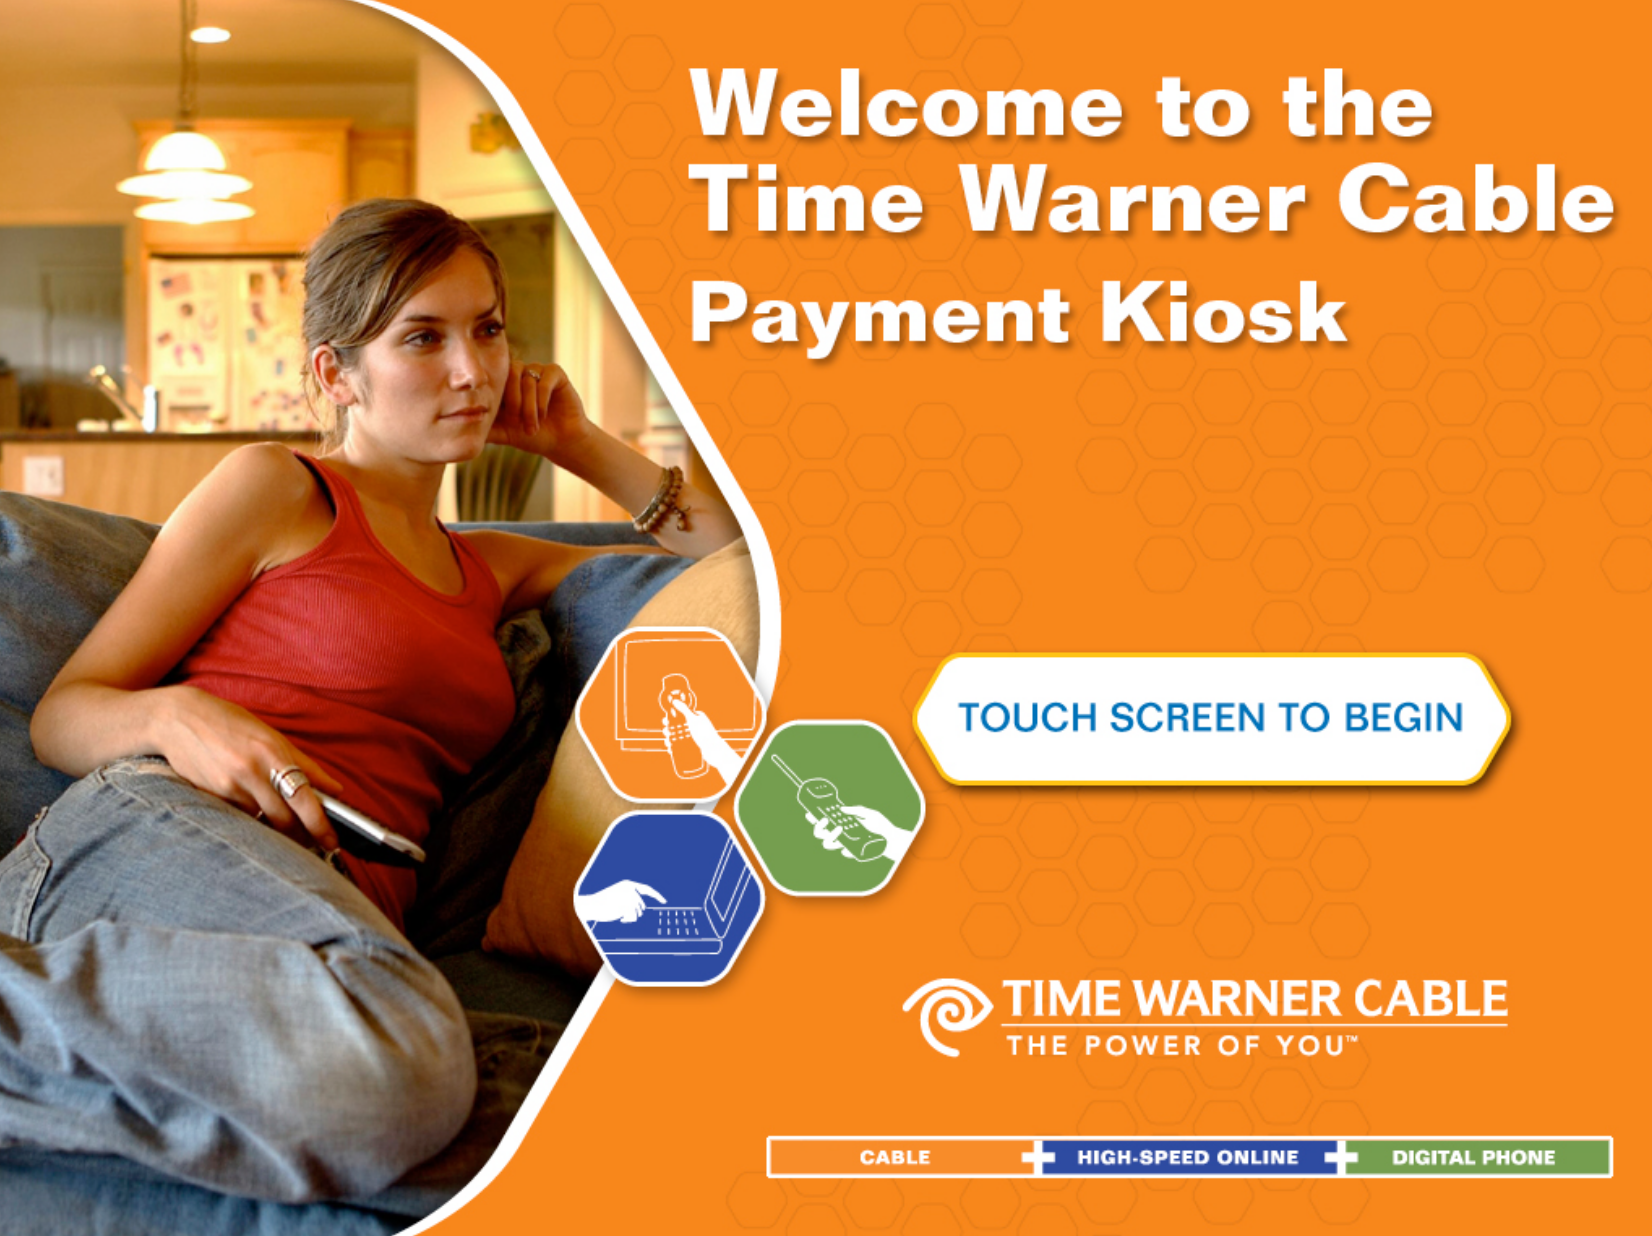 Time Warner Cable Payment Kiosk welcome screen with instructions